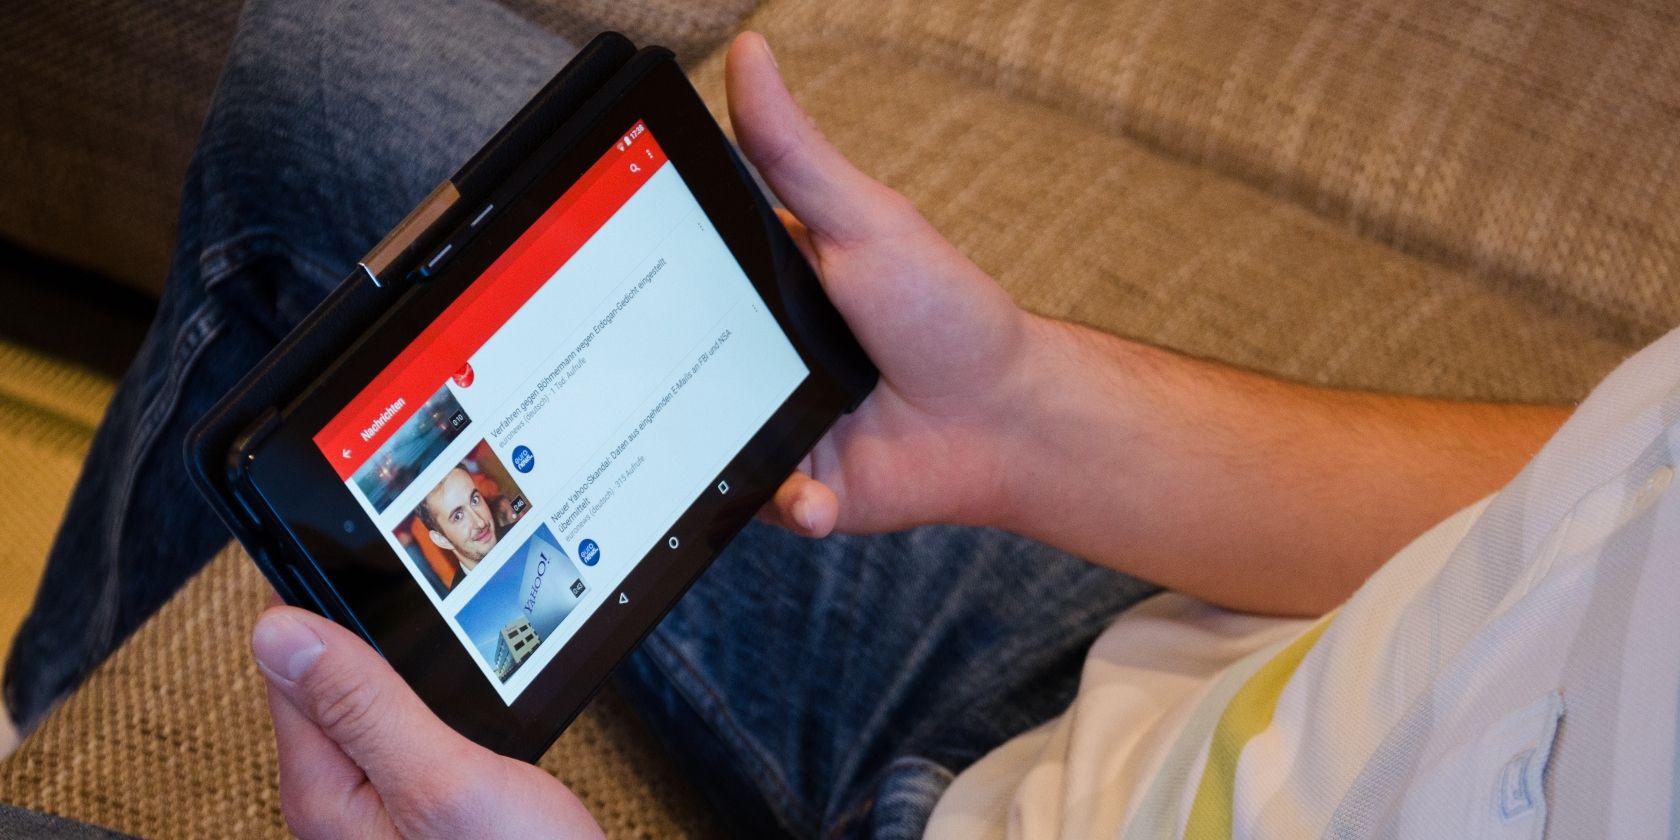 A person using YouTube on a tablet